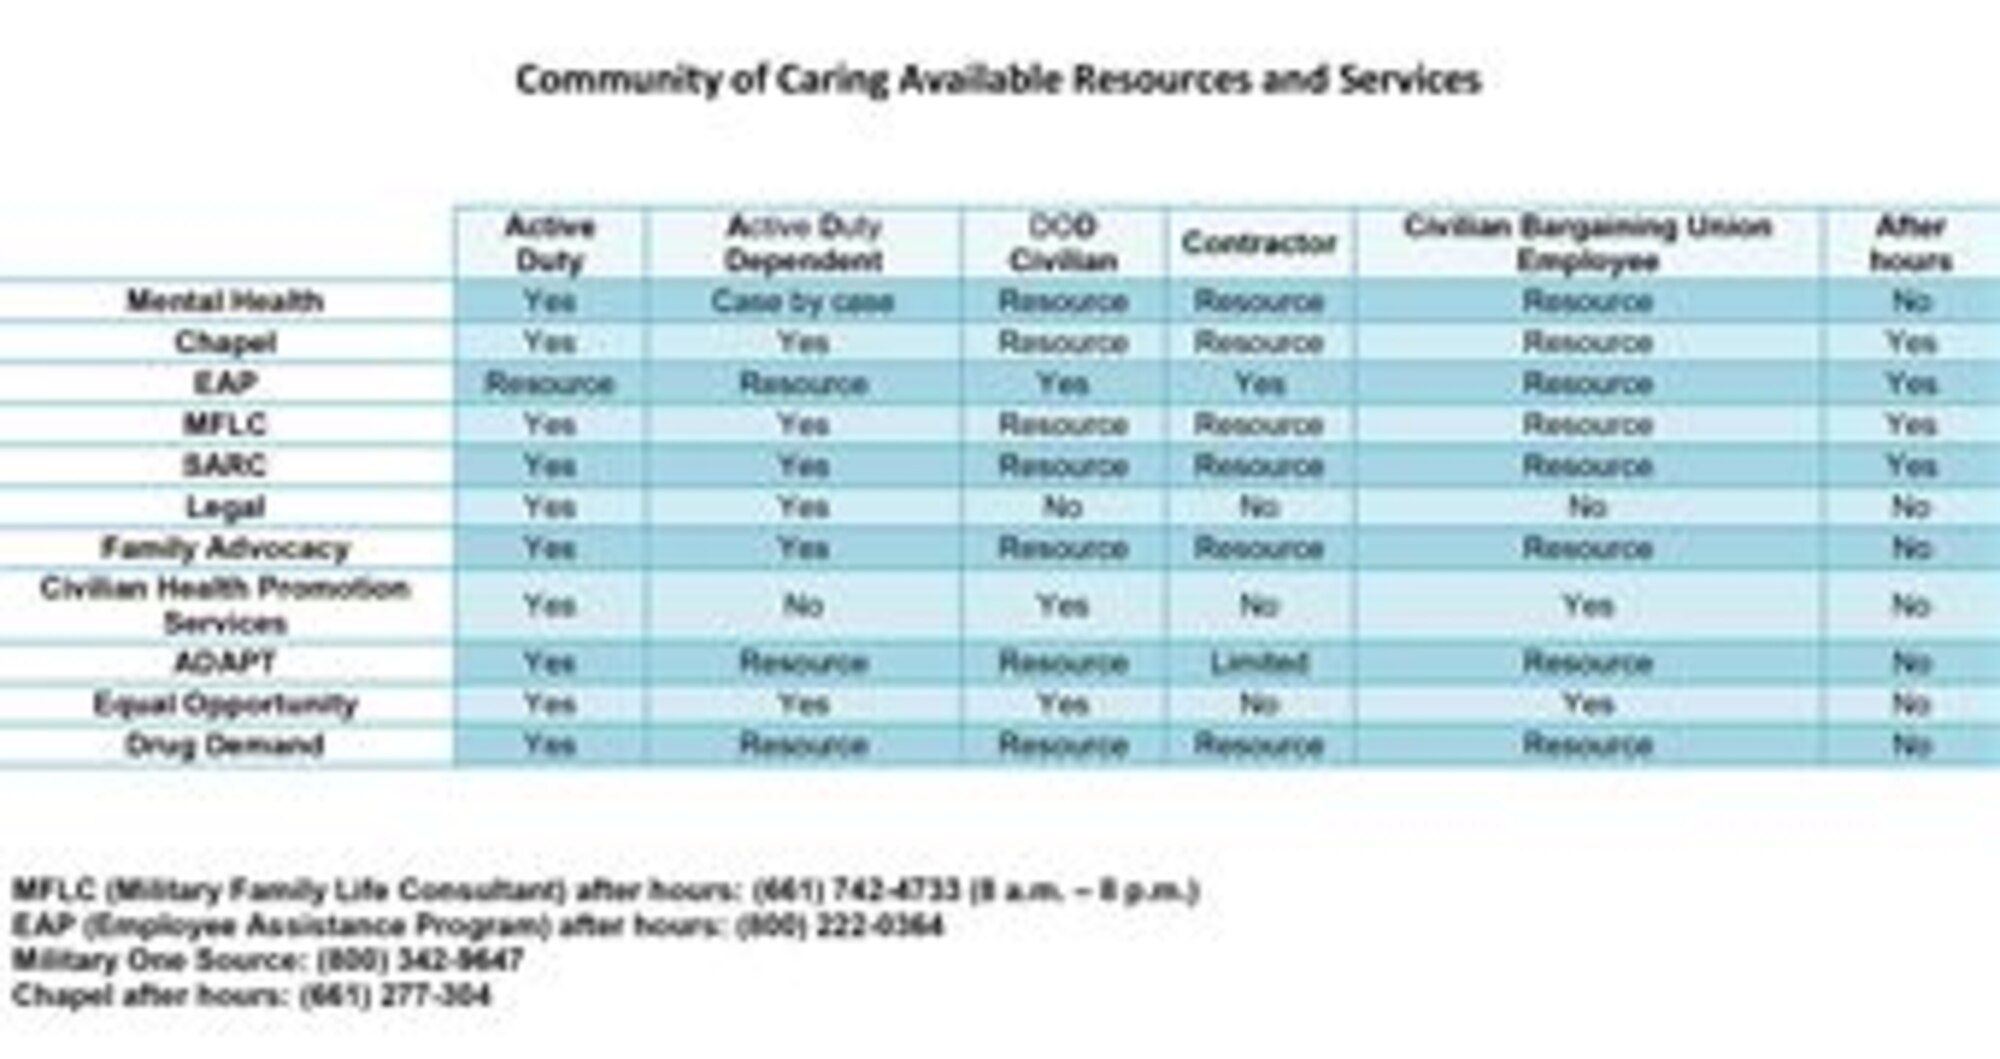 Community of Caring Available Resources and Services